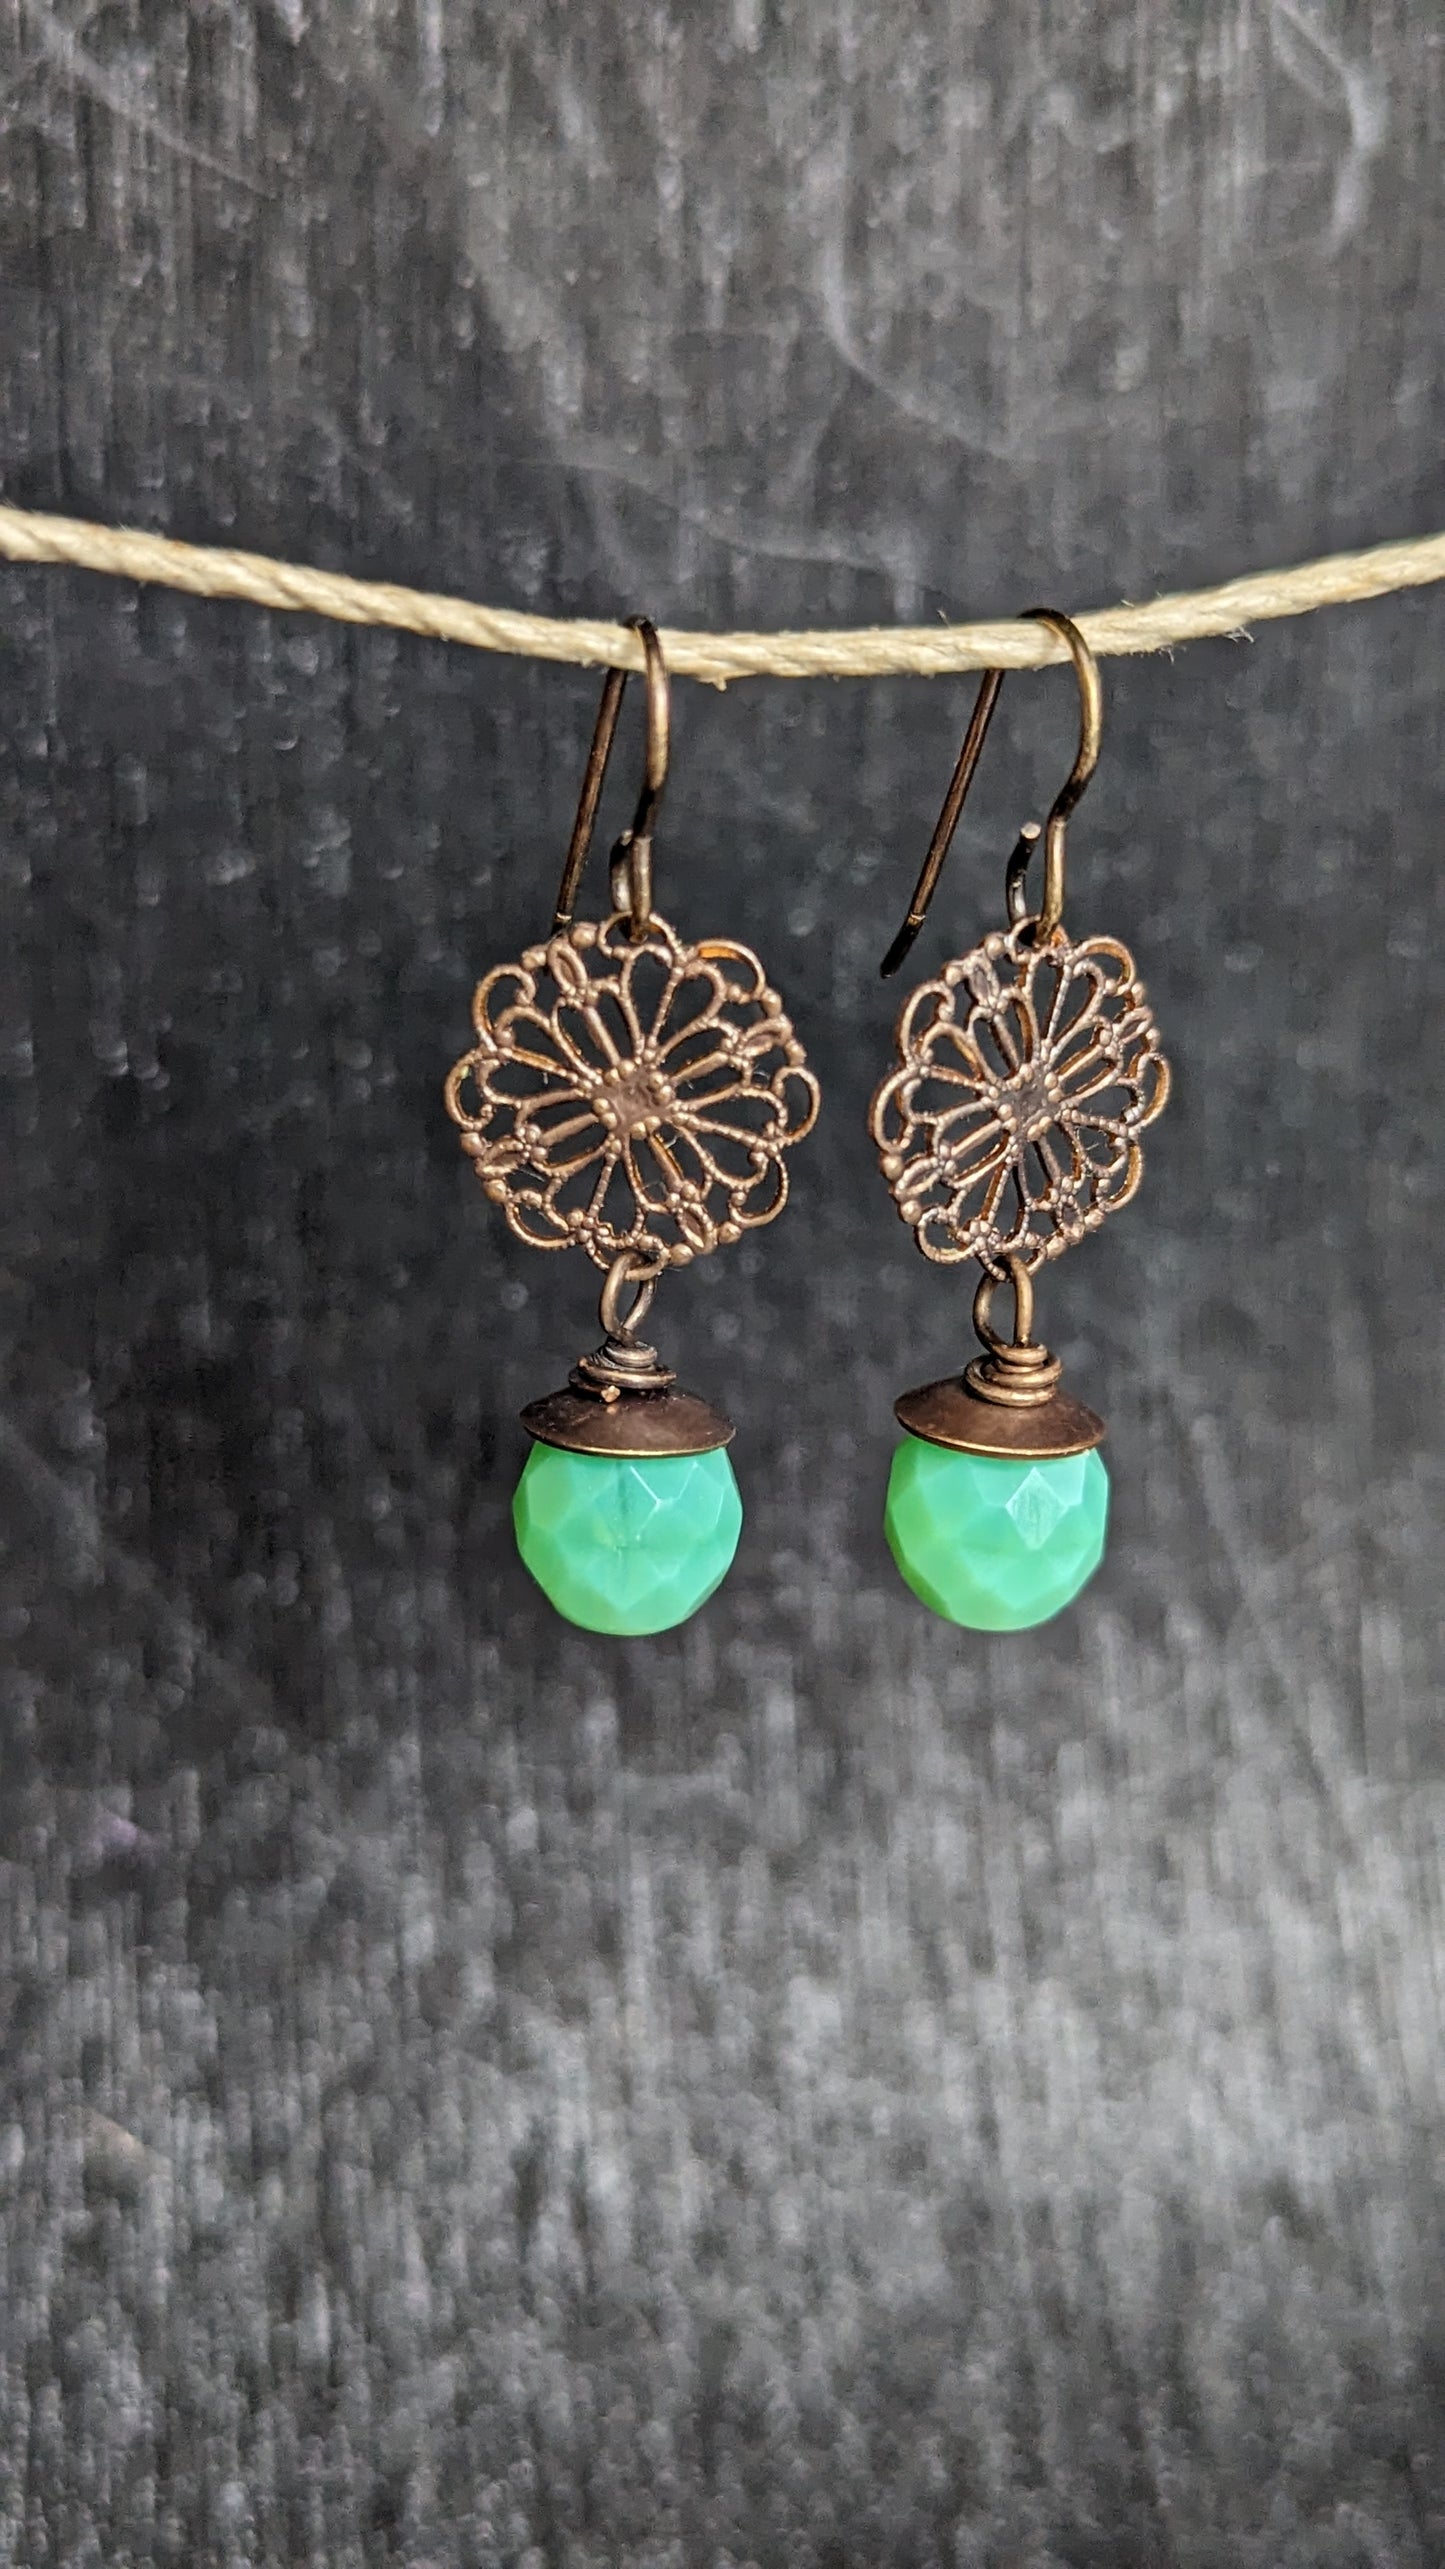 Brass Filigree Earrings with Glass Beads